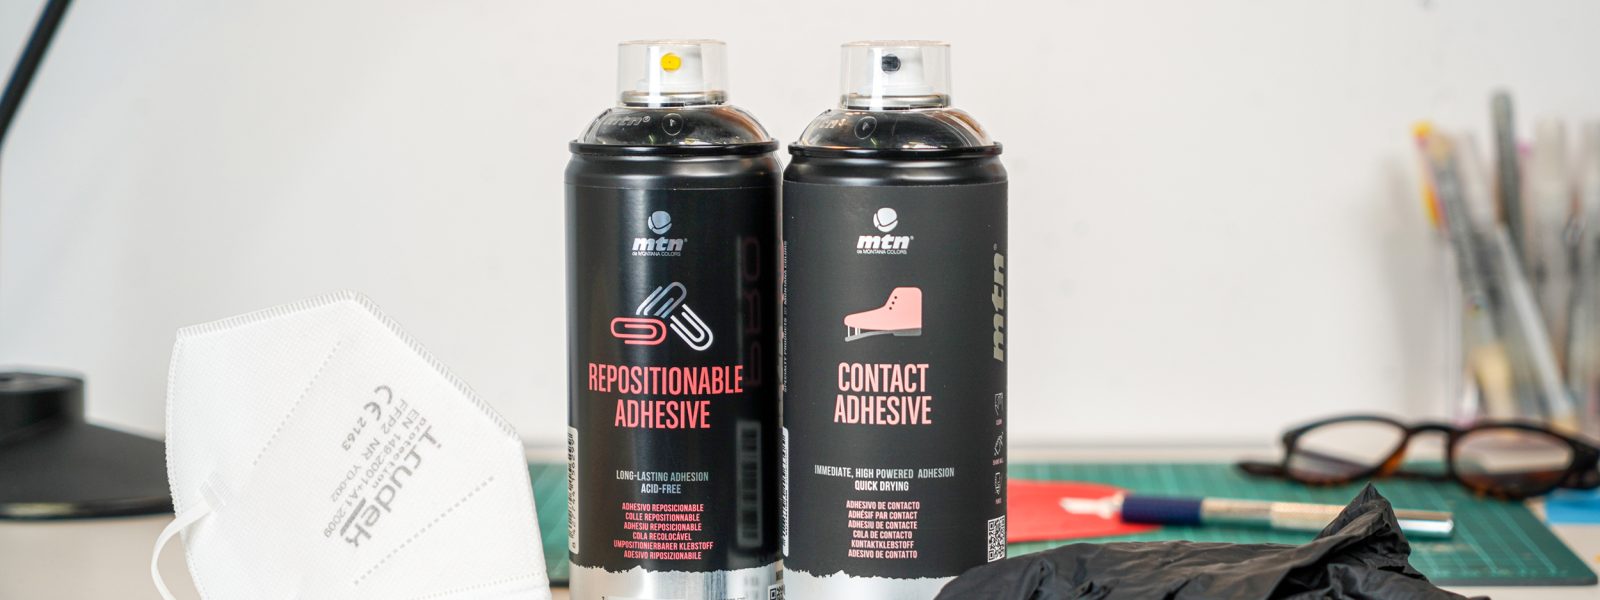 MTN PRO Repositionable Adhesive & Contact Adhesive-8379